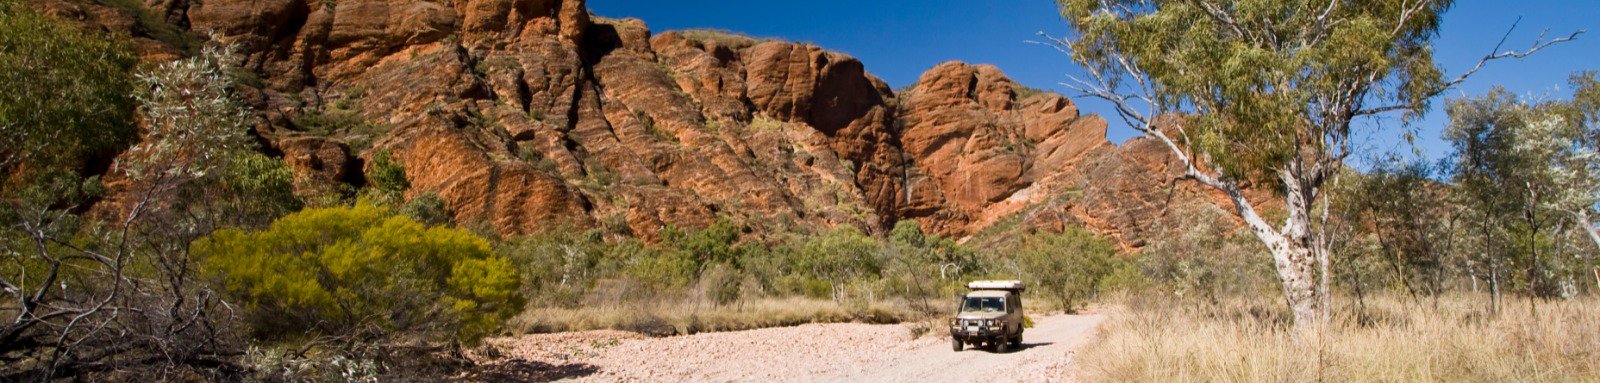 4WD driving in the Australian outback 